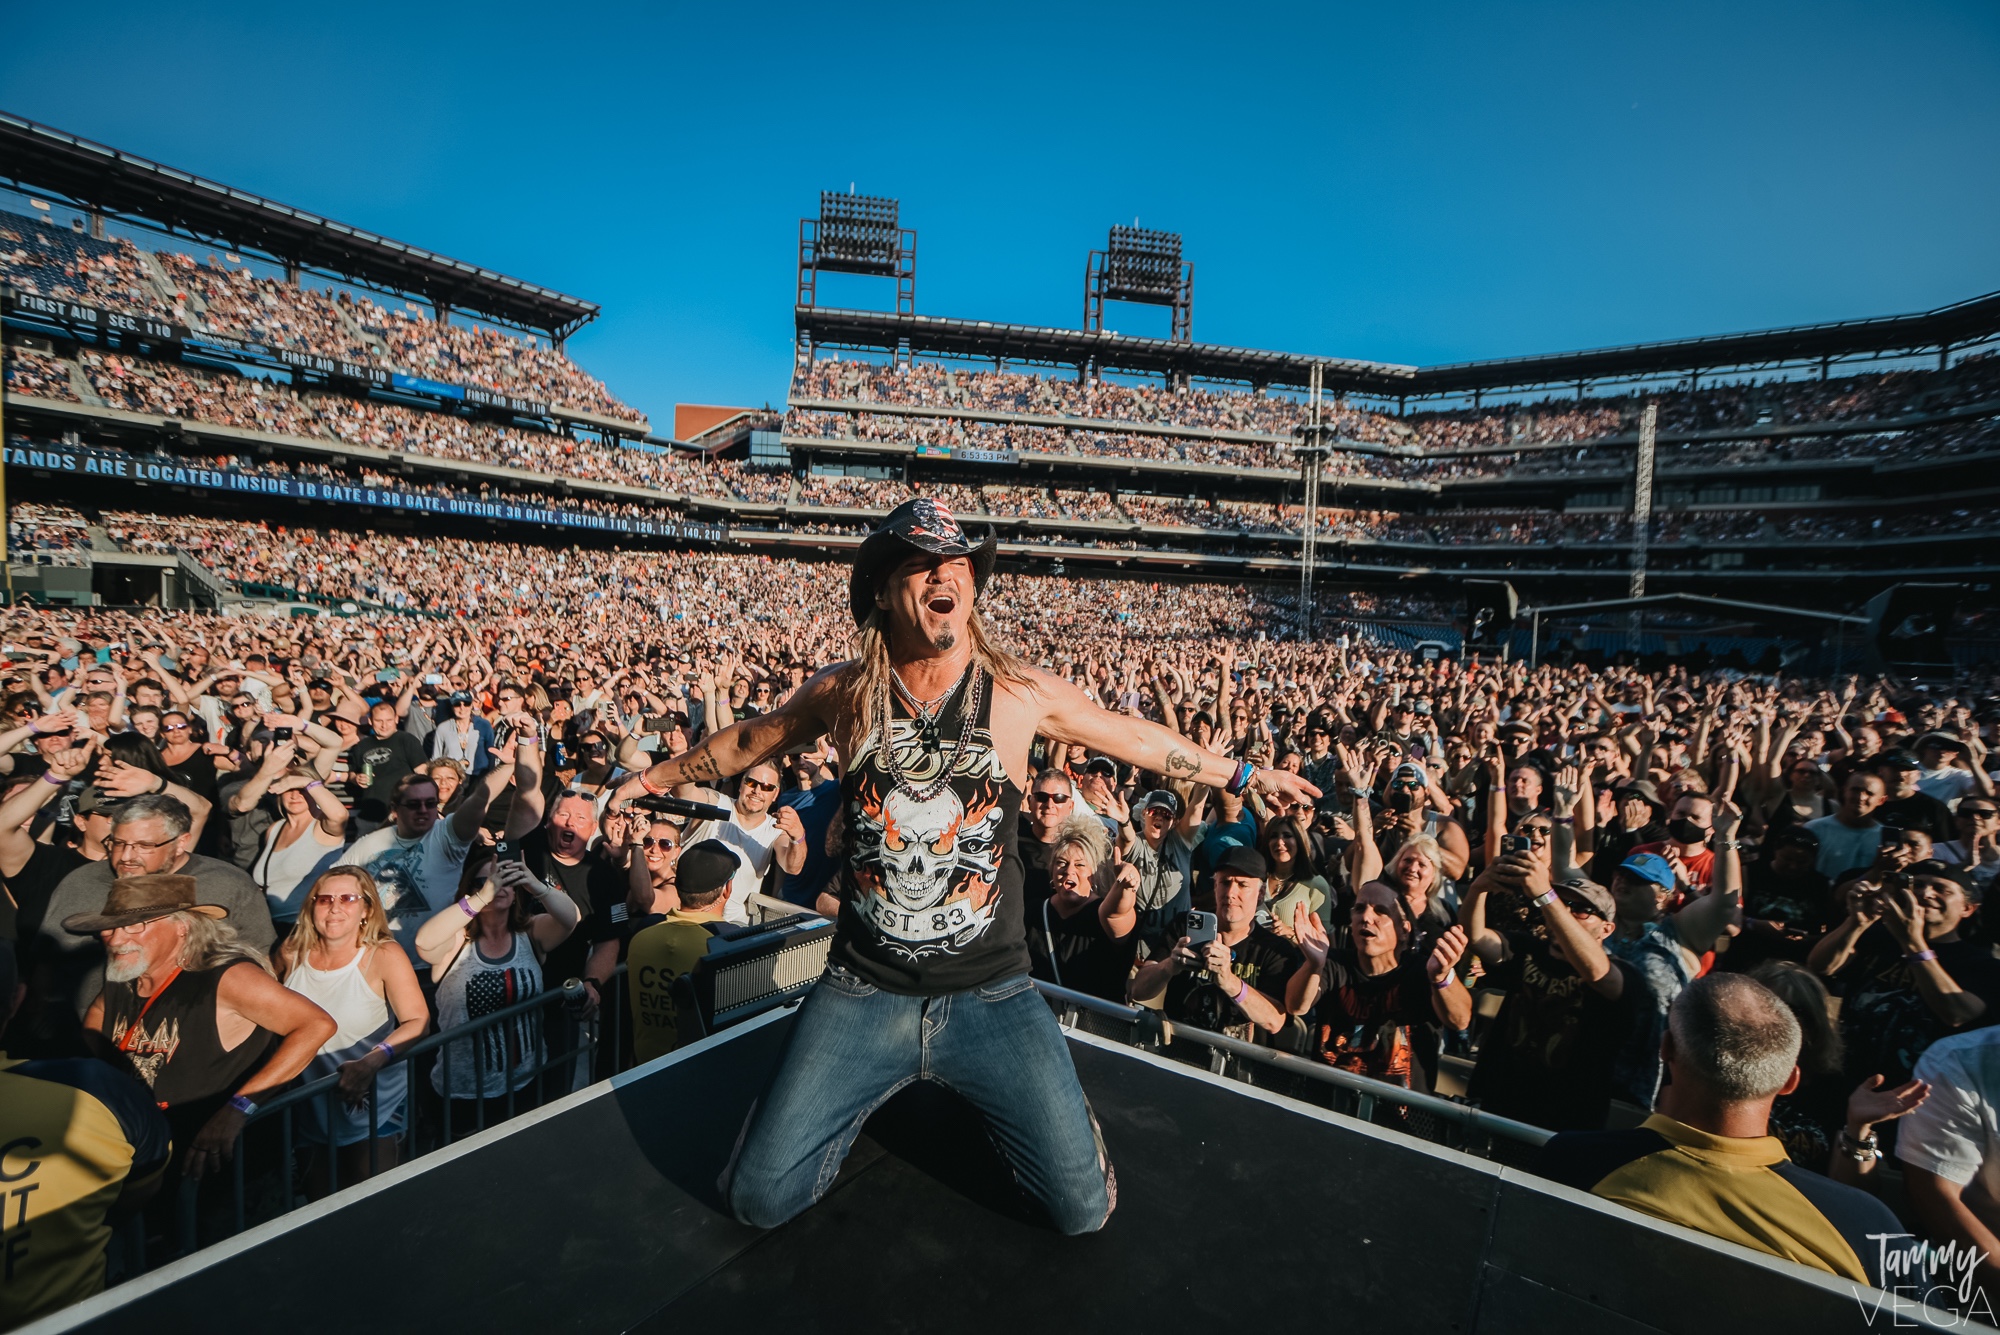 Bret Michaels Talks Stadium Tour, Solo Tour In New USA Today Feature